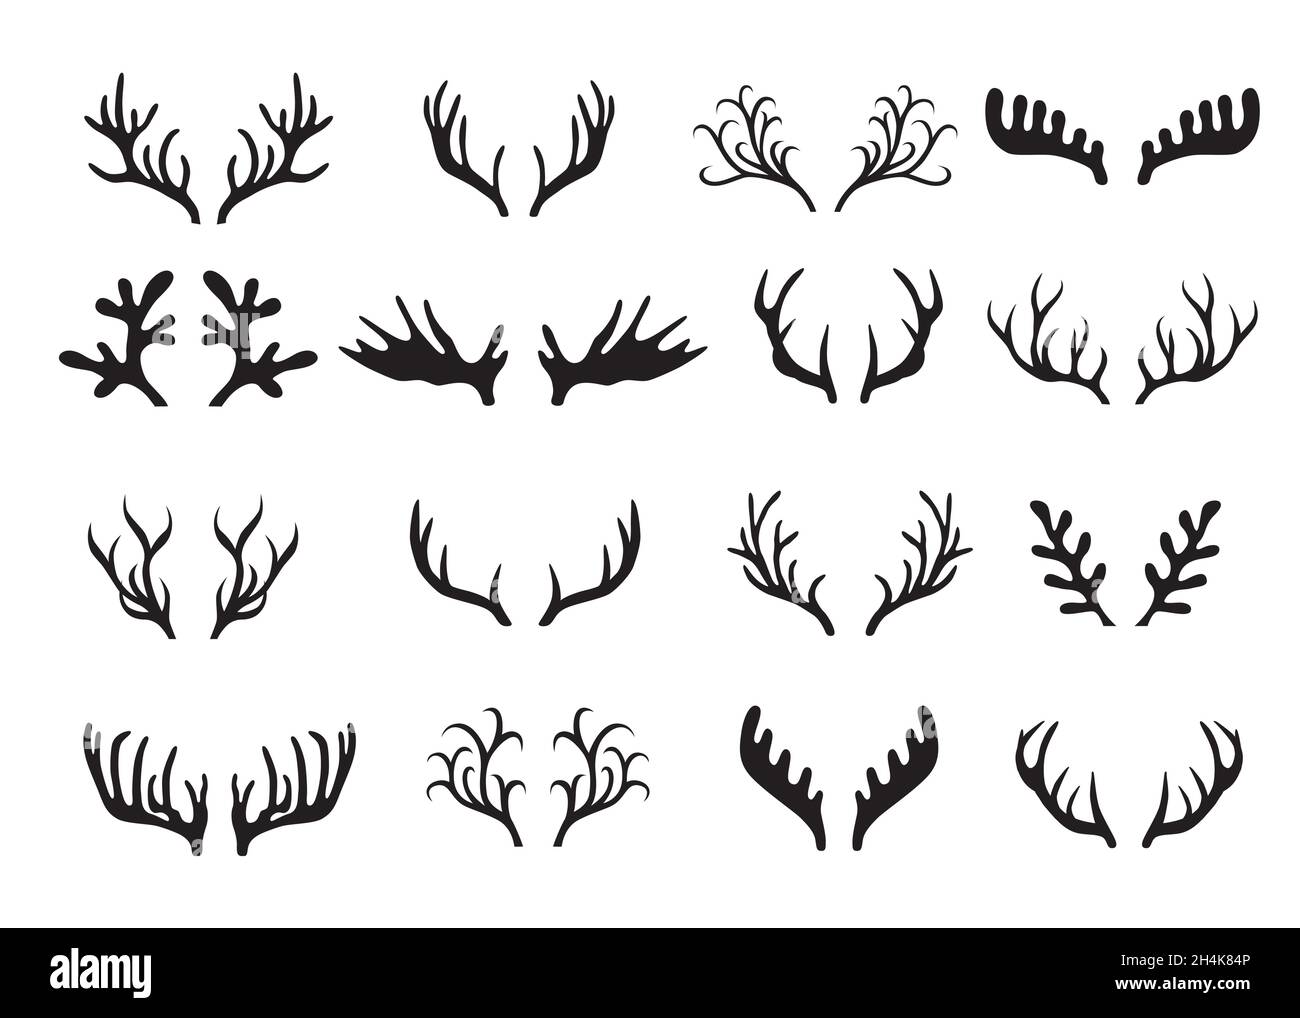 Deer antlers collection isolated on white background. Vector illustration. Stock Vector